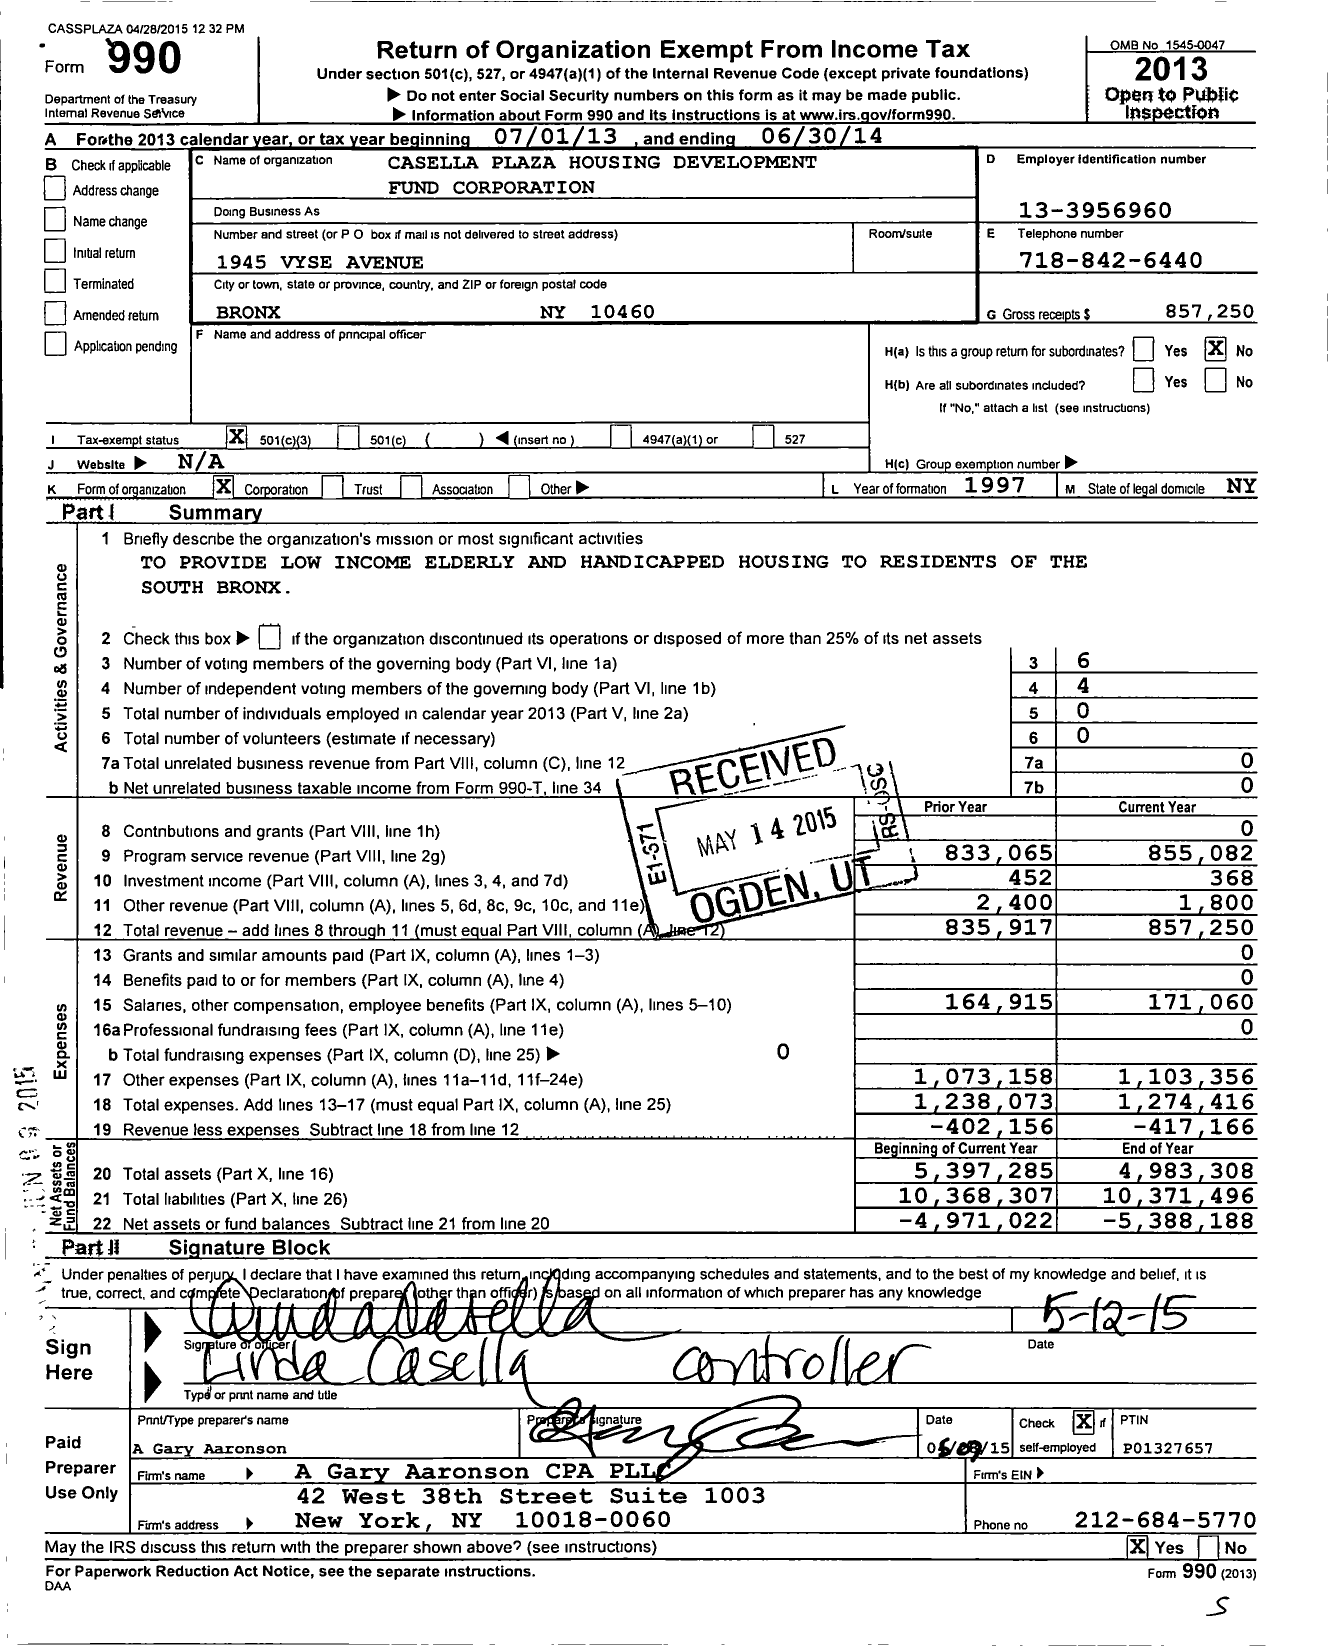 Image of first page of 2013 Form 990 for Casella Plaza Housing Development Fund Corporation